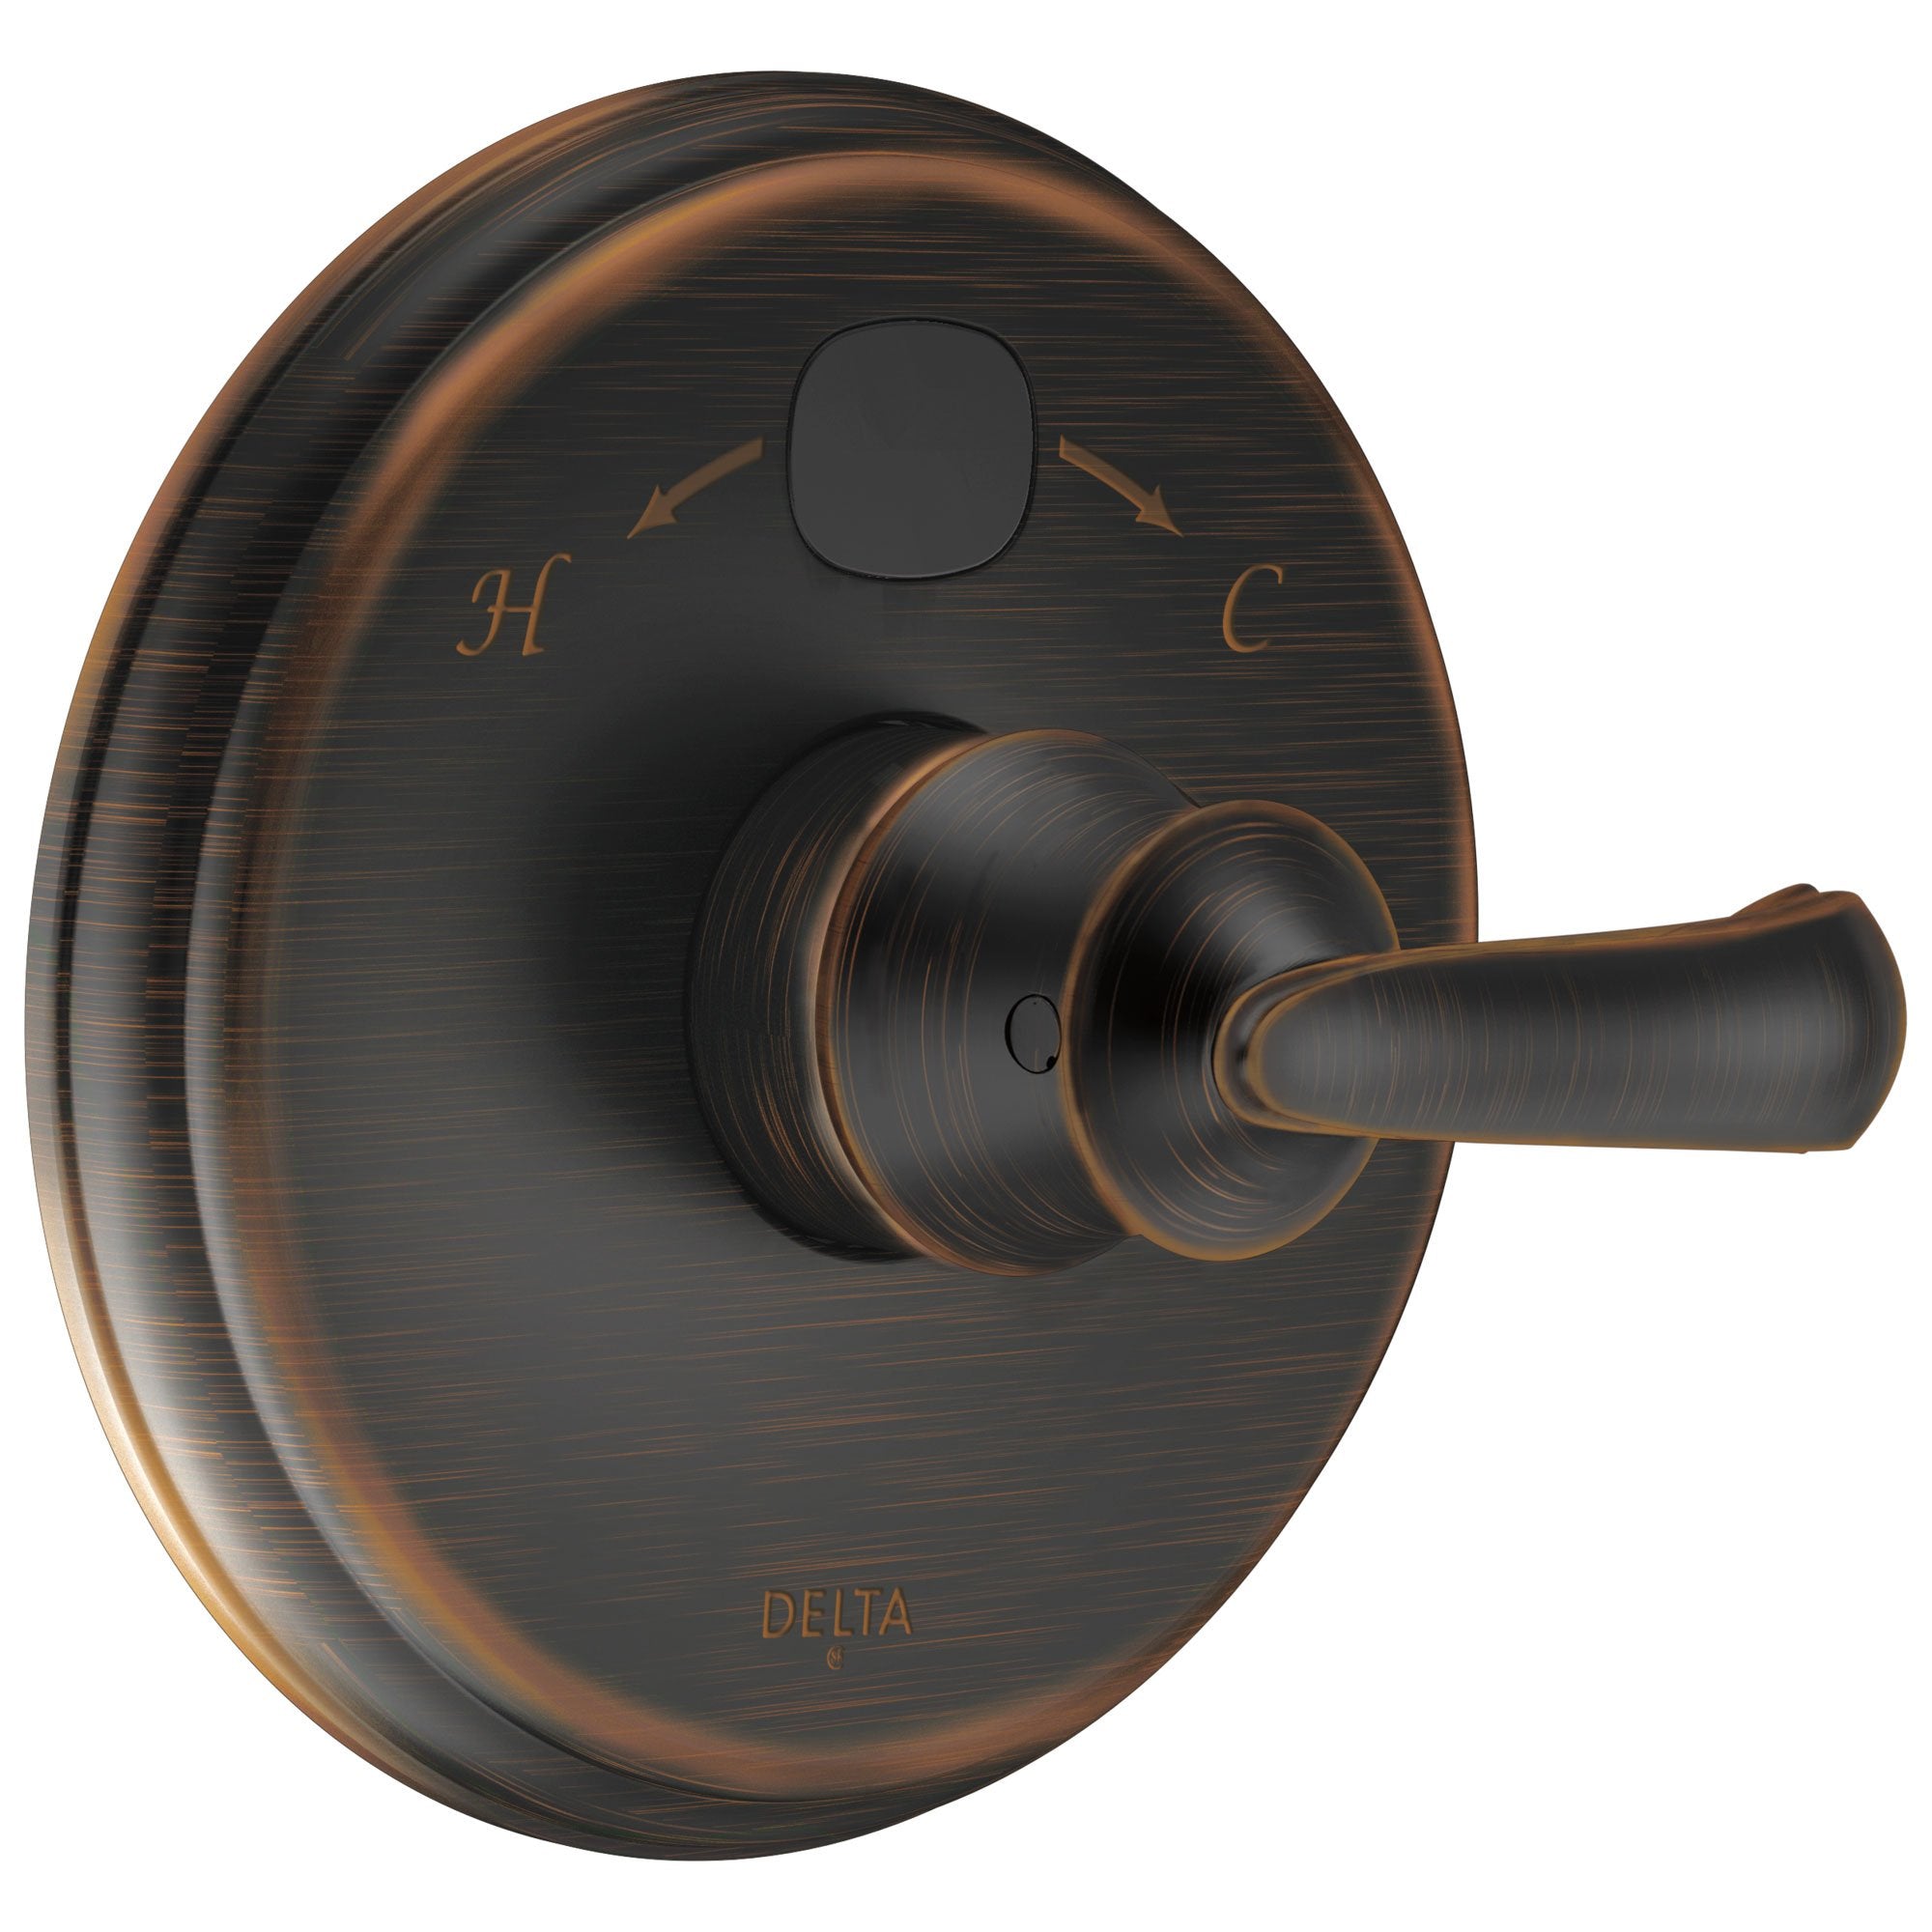 Delta Venetian Bronze Cassidy 14 Series Digital Display Temp2O Shower Valve Control COMPLETE with Single French Curve Lever Handle and Valve with Stops D1676V